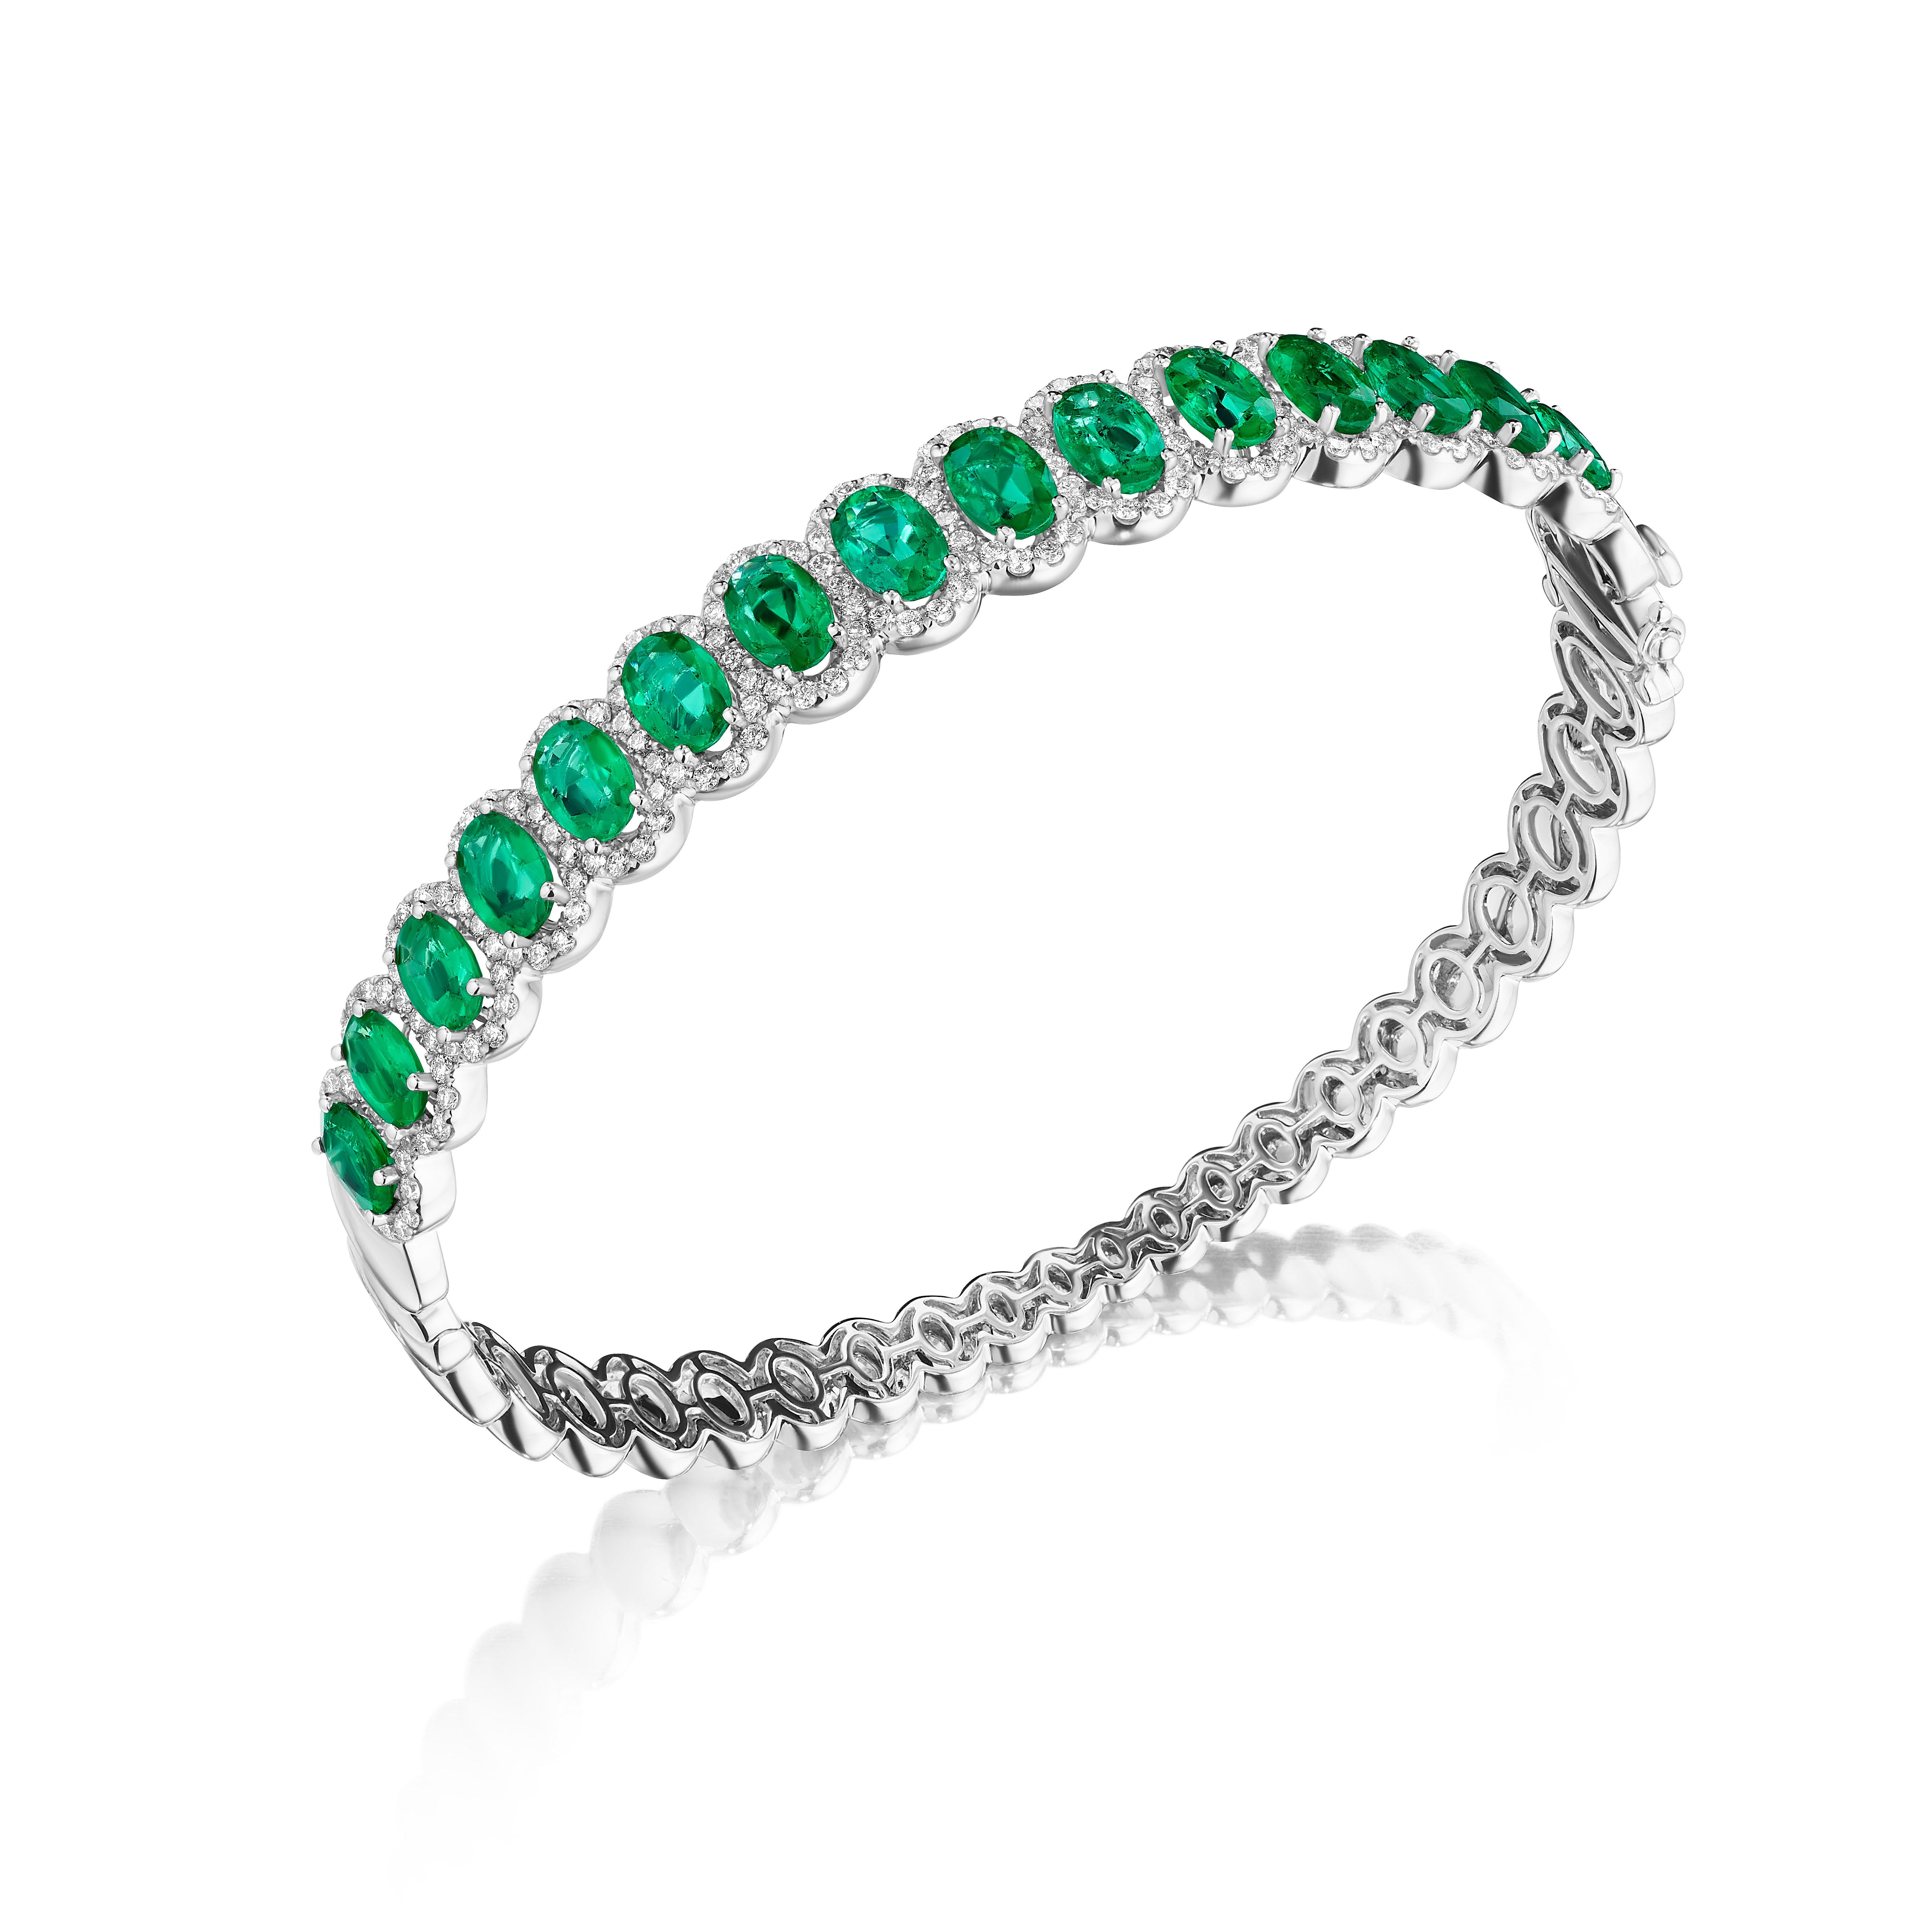 • A truly exquisite assortment of 15 oval cut green emeralds are framed by delicate halos made of round brilliant cut diamonds in this beautiful bangle. The stones are set in 14KT white gold and have a combining total weight of approximately 10.35